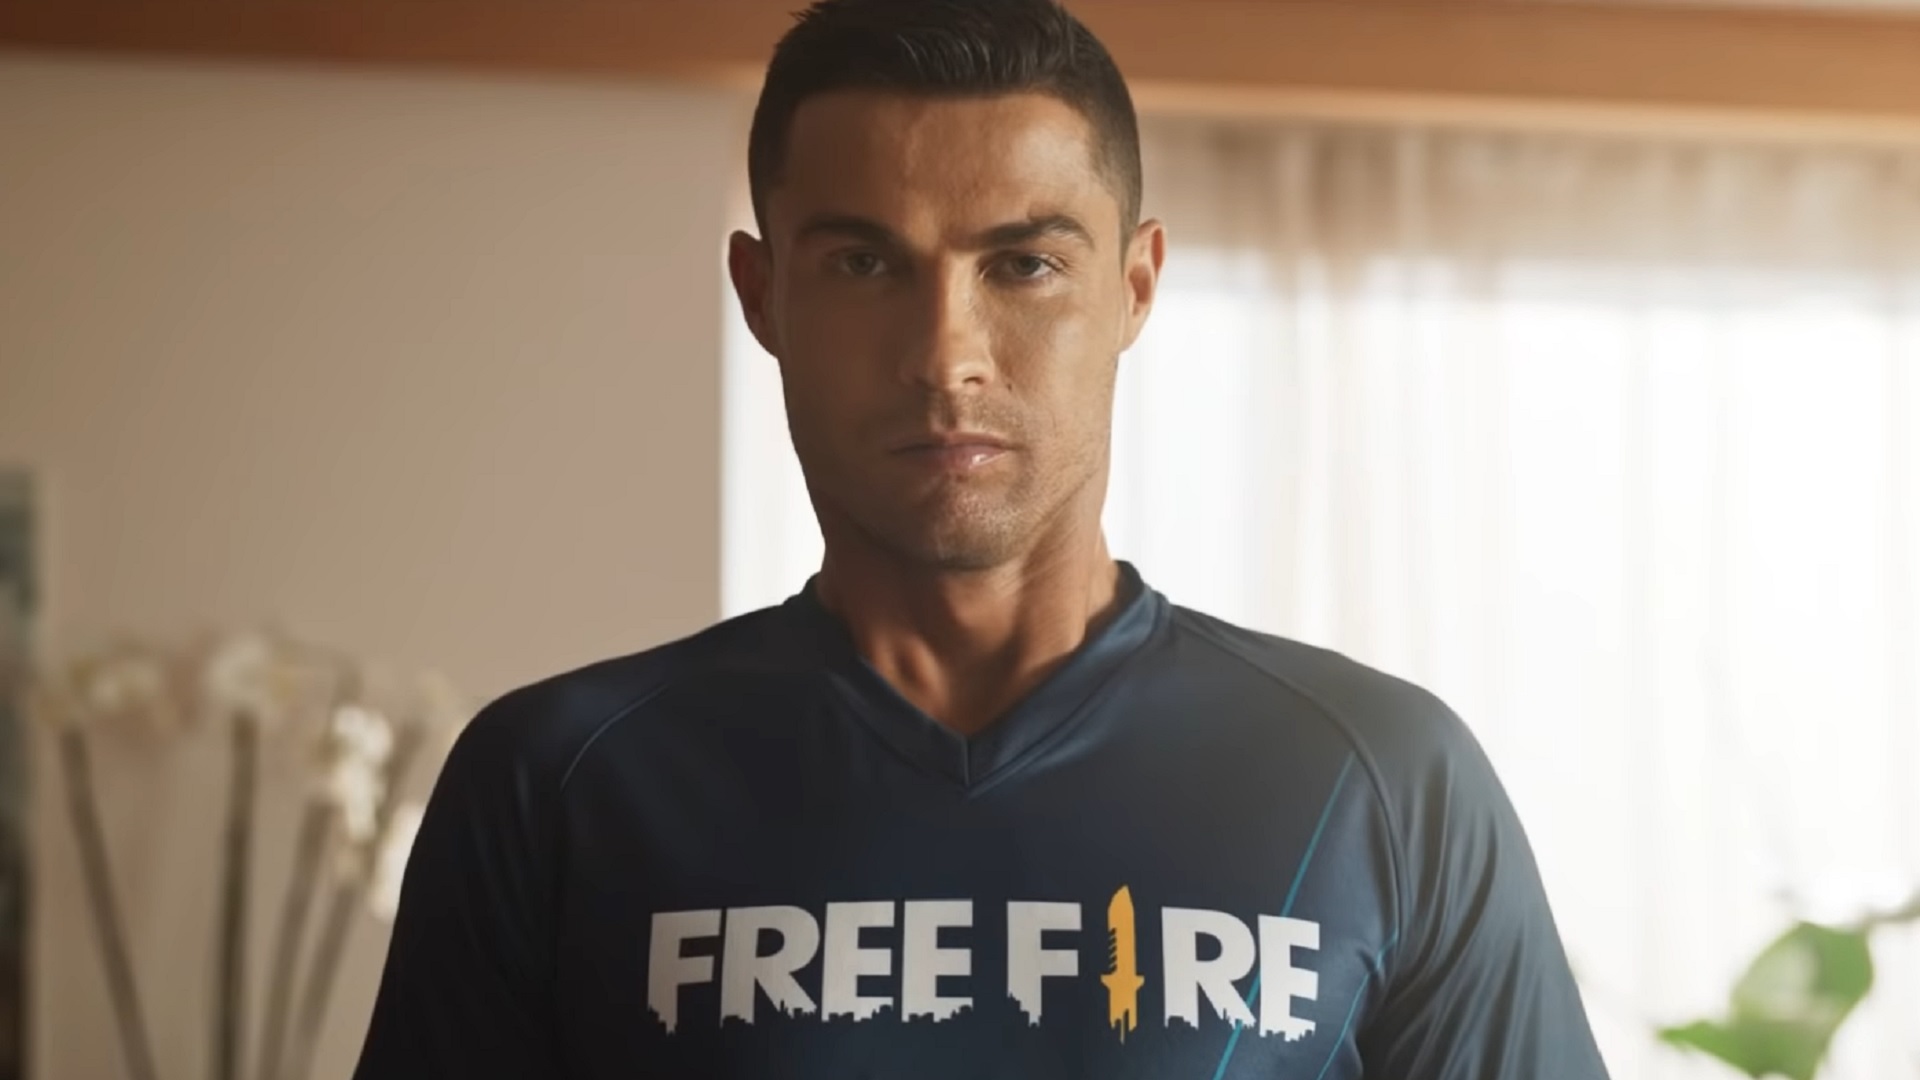 Free Fire adds Cristiano Ronaldo as a playable character | The Loadout